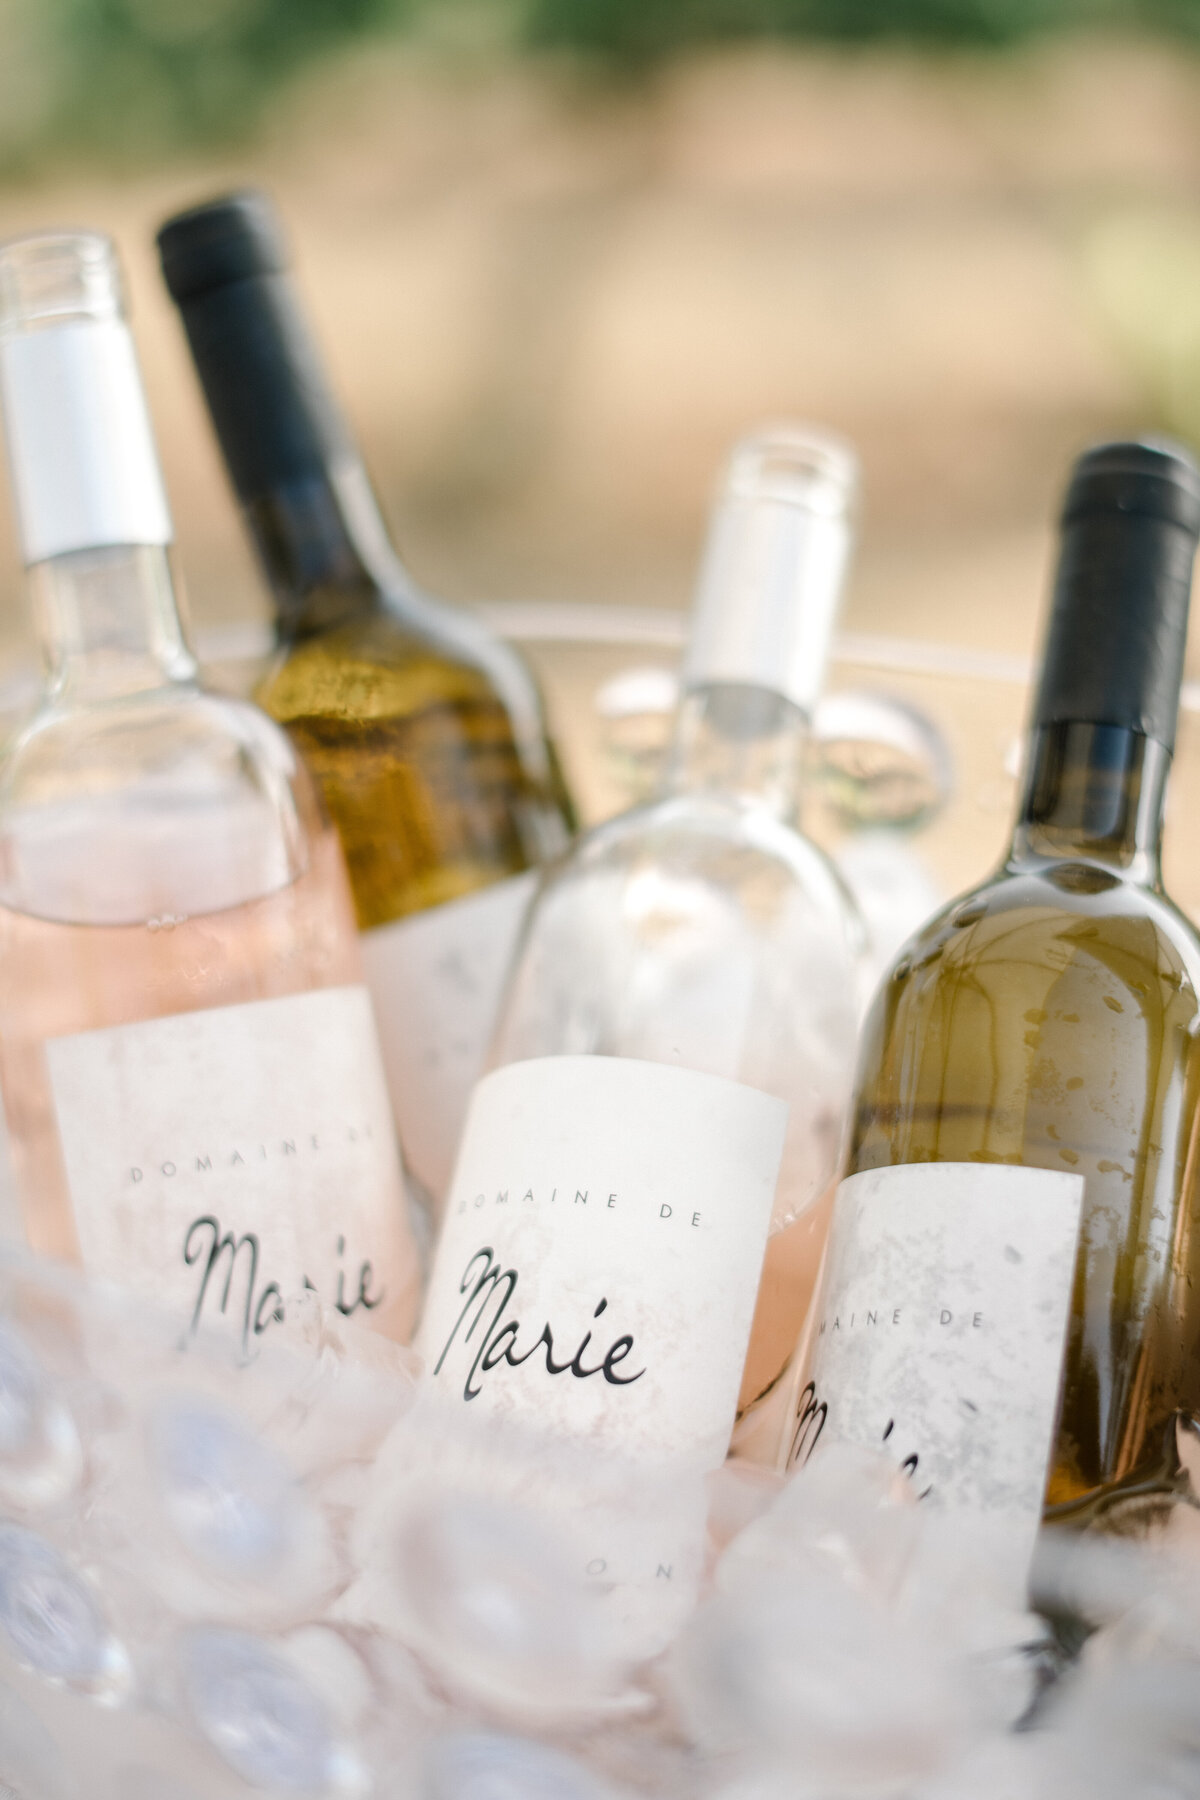 domaine de marie rose at summer wedding in provence